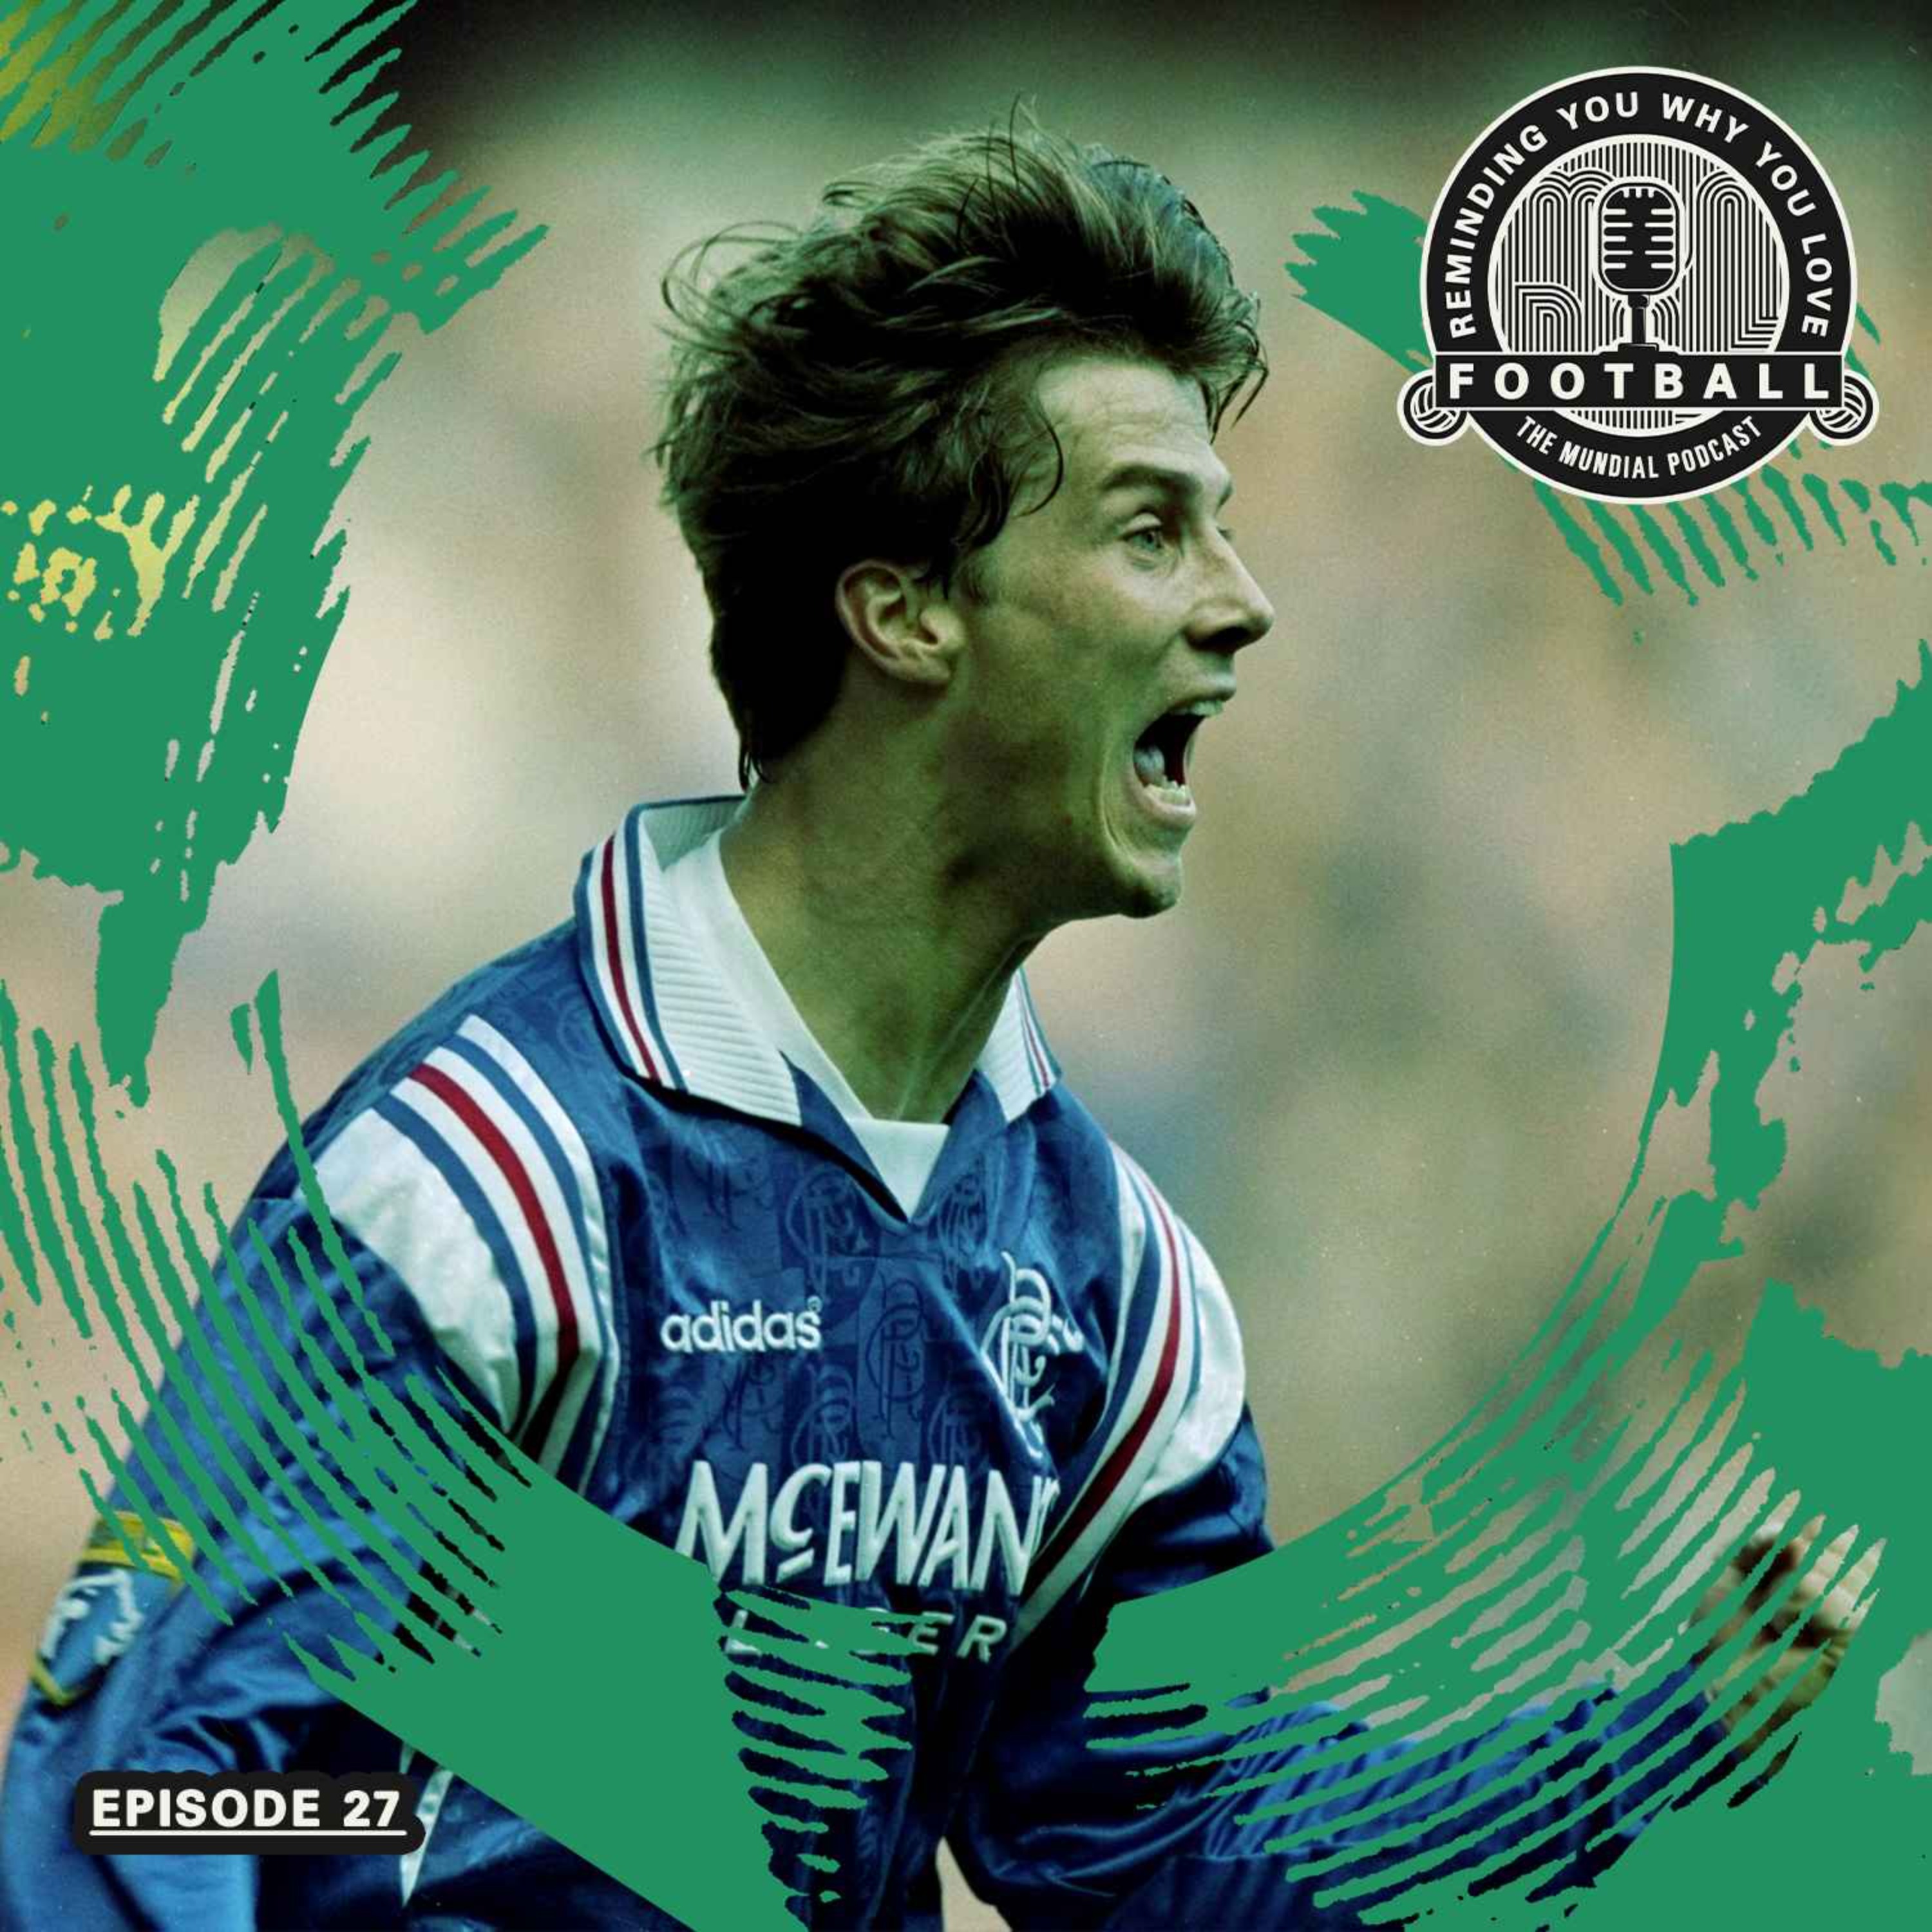 The Life of Brian (Laudrup)